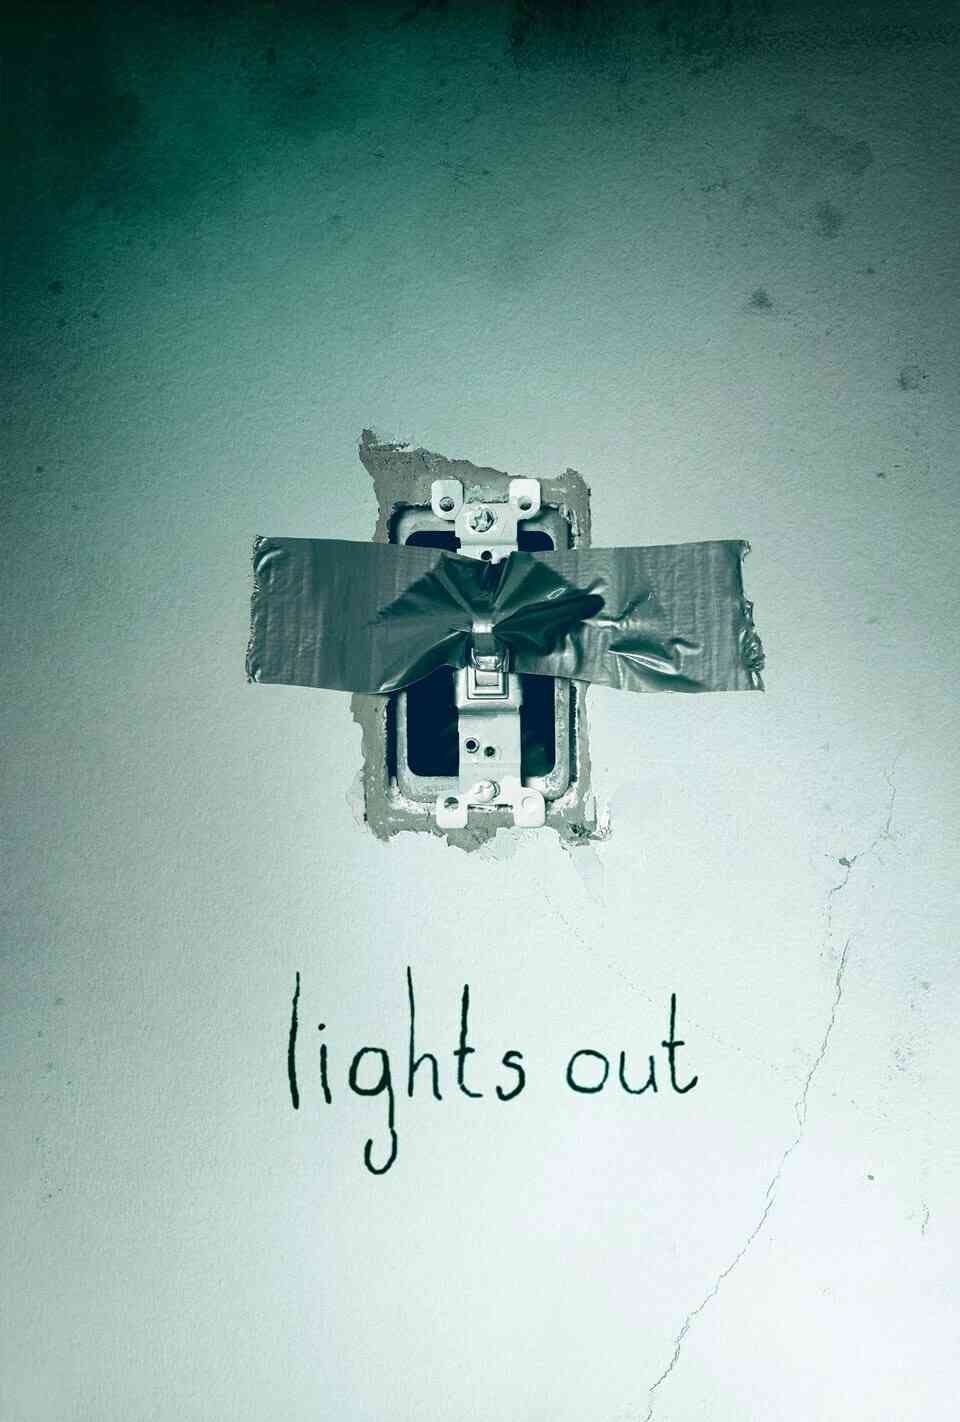 Read Lights Out screenplay (poster)